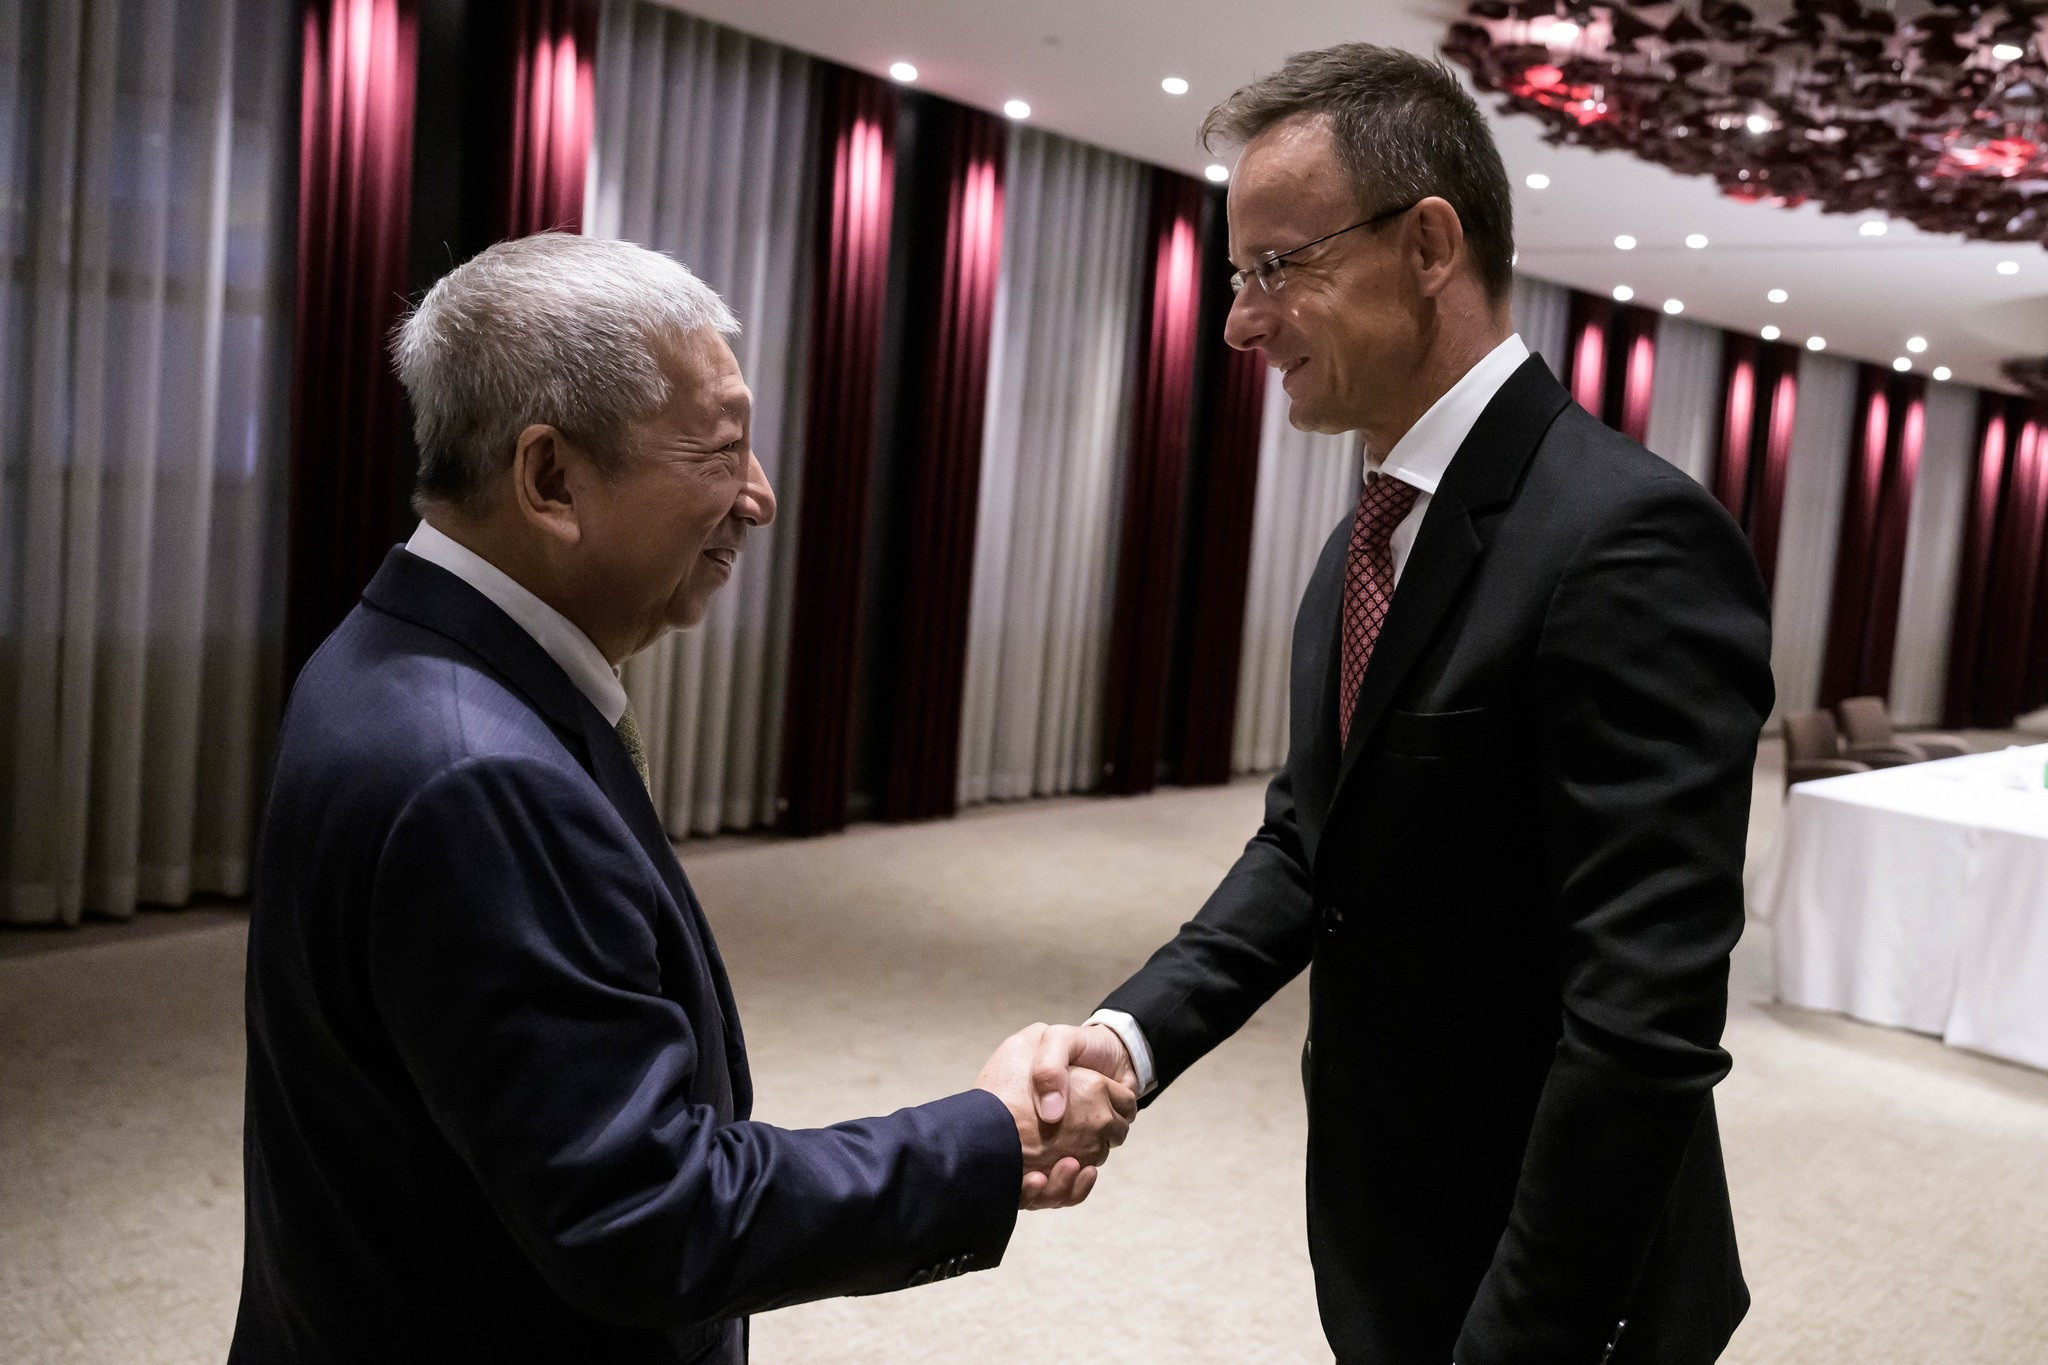 Hungary’s Foreign Minister Péter Szijjártó, right, meets IOC vice-president Ng Ser Miang, left, in Fukuoka ©Getty Images